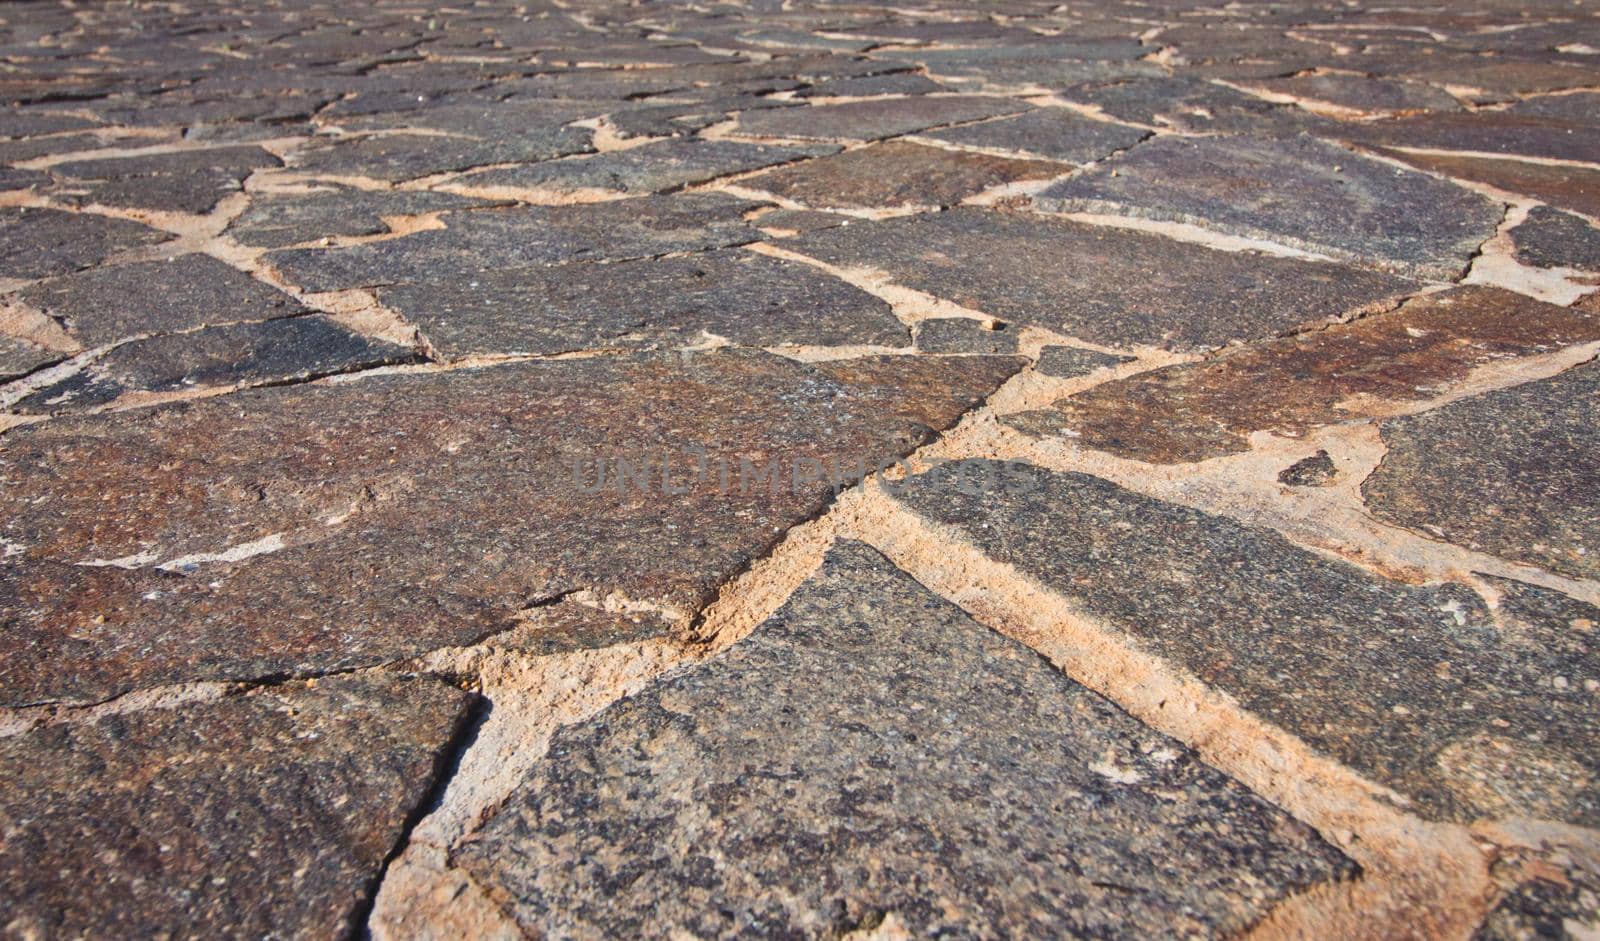 Low wide-angle view of textured crazy paving mosaic floor